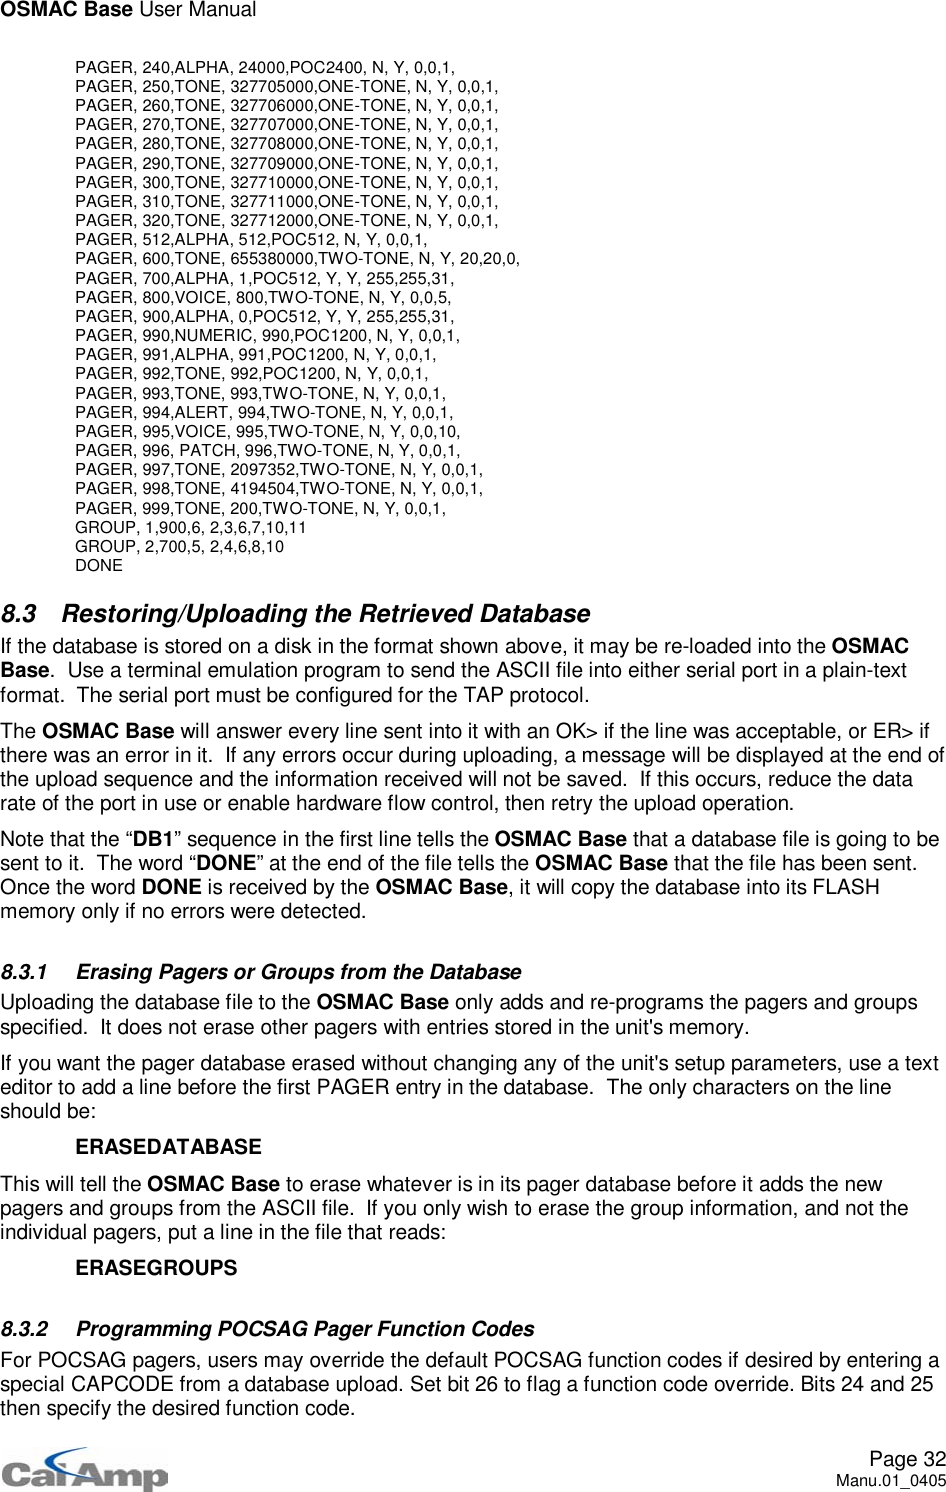 OSMAC Base User ManualPage 32Manu.01_0405PAGER, 240,ALPHA, 24000,POC2400, N, Y, 0,0,1,PAGER, 250,TONE, 327705000,ONE-TONE, N, Y, 0,0,1,PAGER, 260,TONE, 327706000,ONE-TONE, N, Y, 0,0,1,PAGER, 270,TONE, 327707000,ONE-TONE, N, Y, 0,0,1,PAGER, 280,TONE, 327708000,ONE-TONE, N, Y, 0,0,1,PAGER, 290,TONE, 327709000,ONE-TONE, N, Y, 0,0,1,PAGER, 300,TONE, 327710000,ONE-TONE, N, Y, 0,0,1,PAGER, 310,TONE, 327711000,ONE-TONE, N, Y, 0,0,1,PAGER, 320,TONE, 327712000,ONE-TONE, N, Y, 0,0,1,PAGER, 512,ALPHA, 512,POC512, N, Y, 0,0,1,PAGER, 600,TONE, 655380000,TWO-TONE, N, Y, 20,20,0,PAGER,700,ALPHA,1,POC512,Y,Y,255,255,31,PAGER, 800,VOICE, 800,TWO-TONE, N, Y, 0,0,5,PAGER,900,ALPHA,0,POC512,Y,Y,255,255,31,PAGER,990,NUMERIC,990,POC1200,N,Y,0,0,1,PAGER, 991,ALPHA, 991,POC1200, N, Y, 0,0,1,PAGER, 992,TONE, 992,POC1200, N, Y, 0,0,1,PAGER, 993,TONE, 993,TWO-TONE, N, Y, 0,0,1,PAGER, 994,ALERT, 994,TWO-TONE, N, Y, 0,0,1,PAGER, 995,VOICE, 995,TWO-TONE, N, Y, 0,0,10,PAGER, 996, PATCH, 996,TWO-TONE, N, Y, 0,0,1,PAGER, 997,TONE, 2097352,TWO-TONE, N, Y, 0,0,1,PAGER, 998,TONE, 4194504,TWO-TONE, N, Y, 0,0,1,PAGER, 999,TONE, 200,TWO-TONE, N, Y, 0,0,1,GROUP, 1,900,6, 2,3,6,7,10,11GROUP, 2,700,5, 2,4,6,8,10DONE8.3 Restoring/Uploading the Retrieved DatabaseIf the database is stored on a disk in the format shown above, it may be re-loaded into the OSMACBase. Use a terminal emulation program to send the ASCII file into either serial port in a plain-textformat. The serial port must be configured for the TAP protocol.The OSMAC Base will answer every line sent into it with an OK&gt; if the line was acceptable, or ER&gt; ifthere was an error in it. If any errors occur during uploading, a message will be displayed at the end ofthe upload sequence and the information received will not be saved. If this occurs, reduce the datarate of the port in use or enable hardware flow control, then retry the upload operation.Note that the “DB1” sequence in the first line tells the OSMAC Base that a database file is going to besent to it. The word “DONE” at the end of the file tells the OSMAC Base that the file has been sent.Once the word DONE is received by the OSMAC Base, it will copy the database into its FLASHmemory only if no errors were detected.8.3.1 Erasing Pagers or Groups from the DatabaseUploading the database file to the OSMAC Base only adds and re-programs the pagers and groupsspecified. It does not erase other pagers with entries stored in the unit&apos;s memory.If you want the pager database erased without changing any of the unit&apos;s setup parameters, use a texteditor to add a line before the first PAGER entry in the database. The only characters on the lineshould be:ERASEDATABASEThis will tell the OSMAC Base to erase whatever is in its pager database before it adds the newpagers and groups from the ASCII file. If you only wish to erase the group information, and not theindividual pagers, put a line in the file that reads:ERASEGROUPS8.3.2 Programming POCSAG Pager Function CodesFor POCSAG pagers, users may override the default POCSAG function codes if desired by entering aspecial CAPCODE from a database upload. Set bit 26 to flag a function code override. Bits 24 and 25then specify the desired function code.